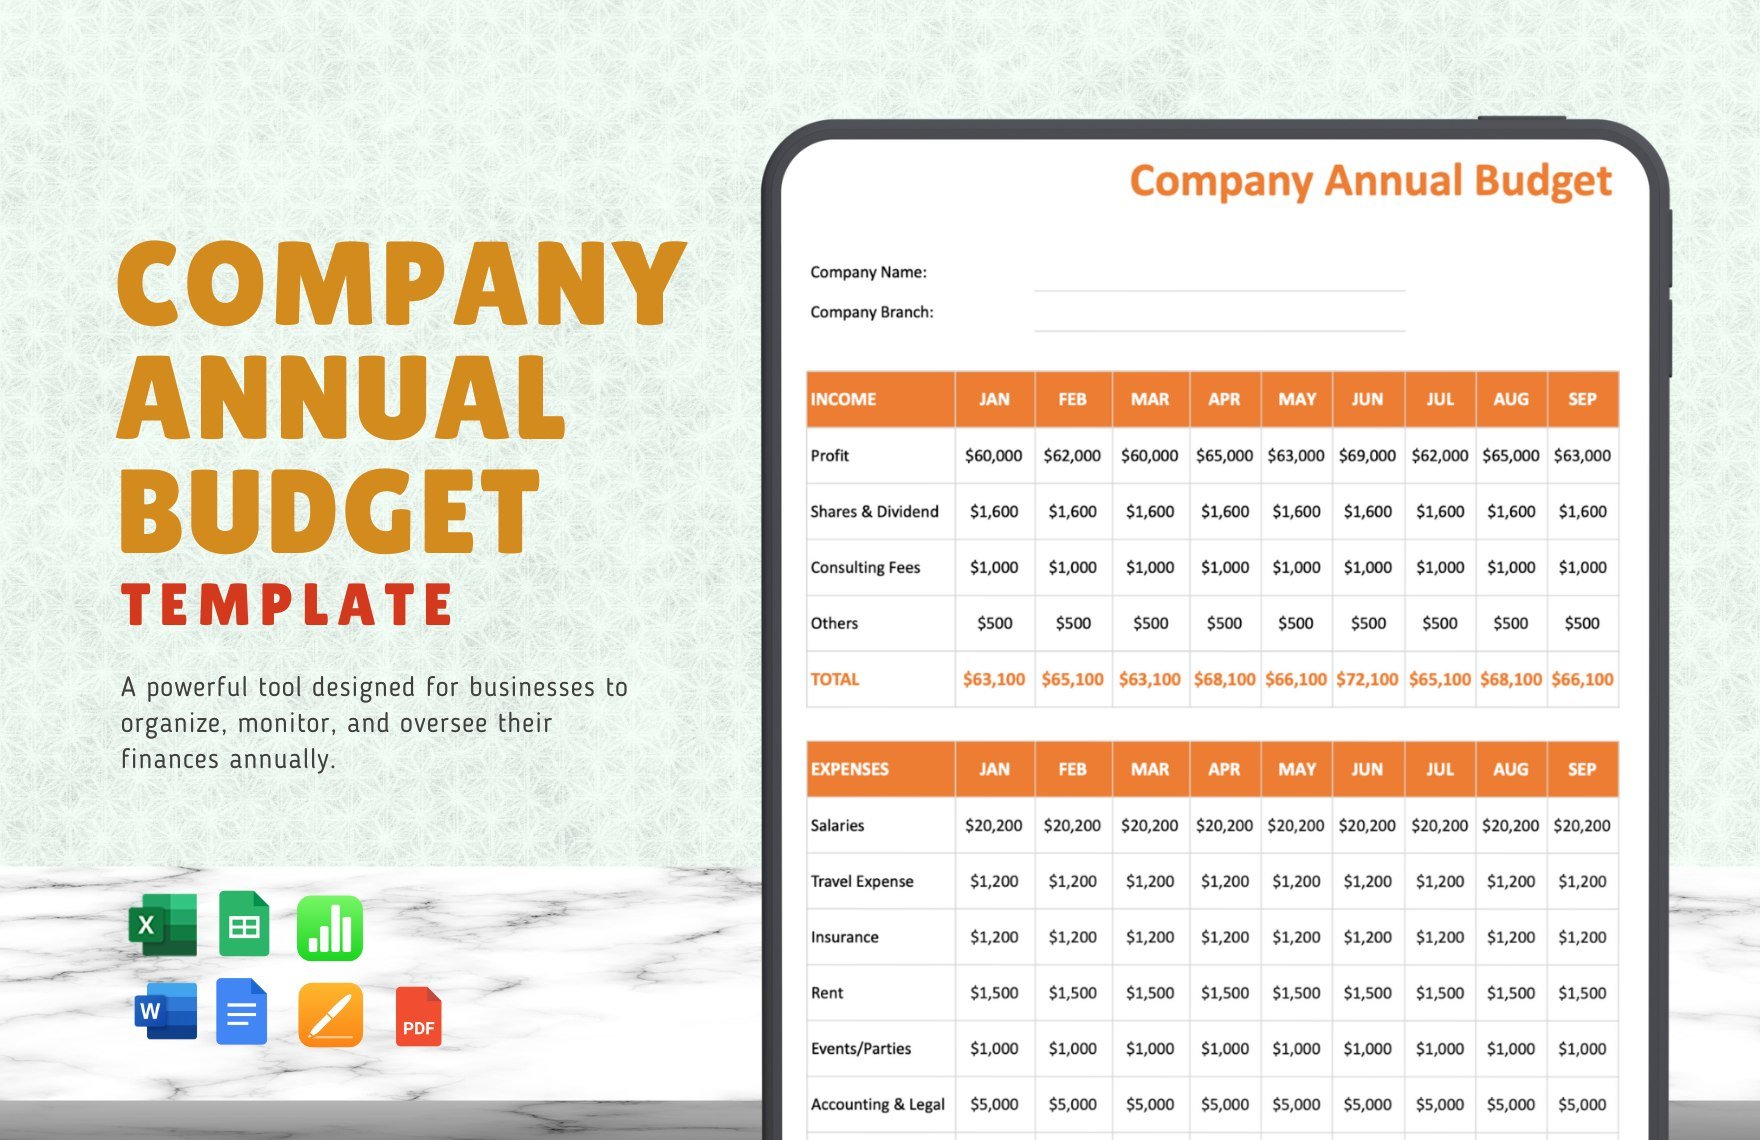 Company Annual Budget Template in Word, Google Docs, Excel, PDF, Google Sheets, Apple Pages, Apple Numbers